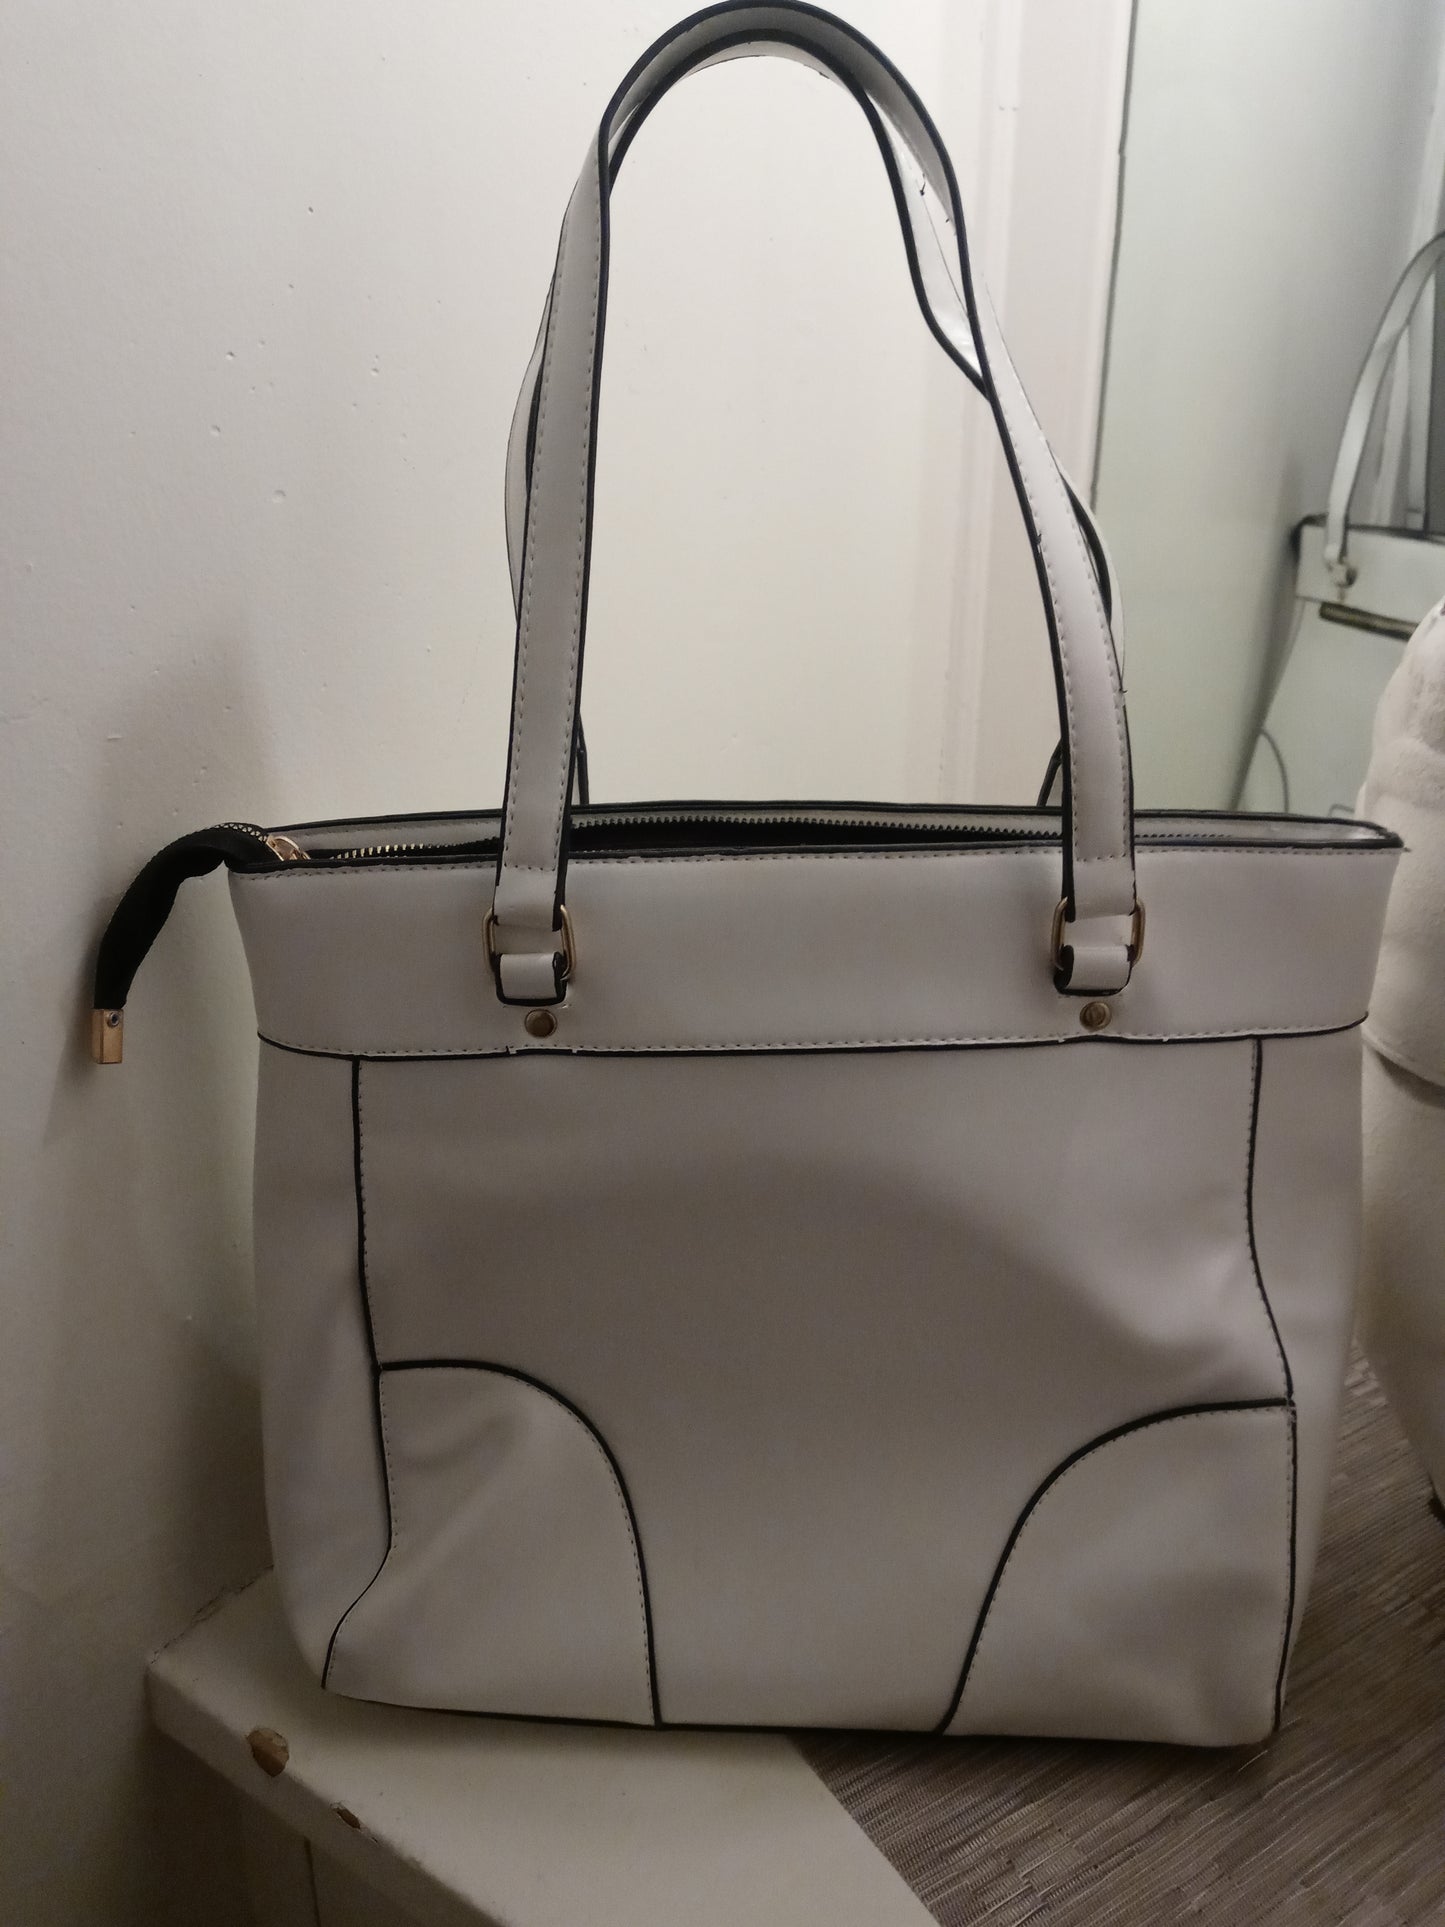 Women's Purse With White Handles White bag